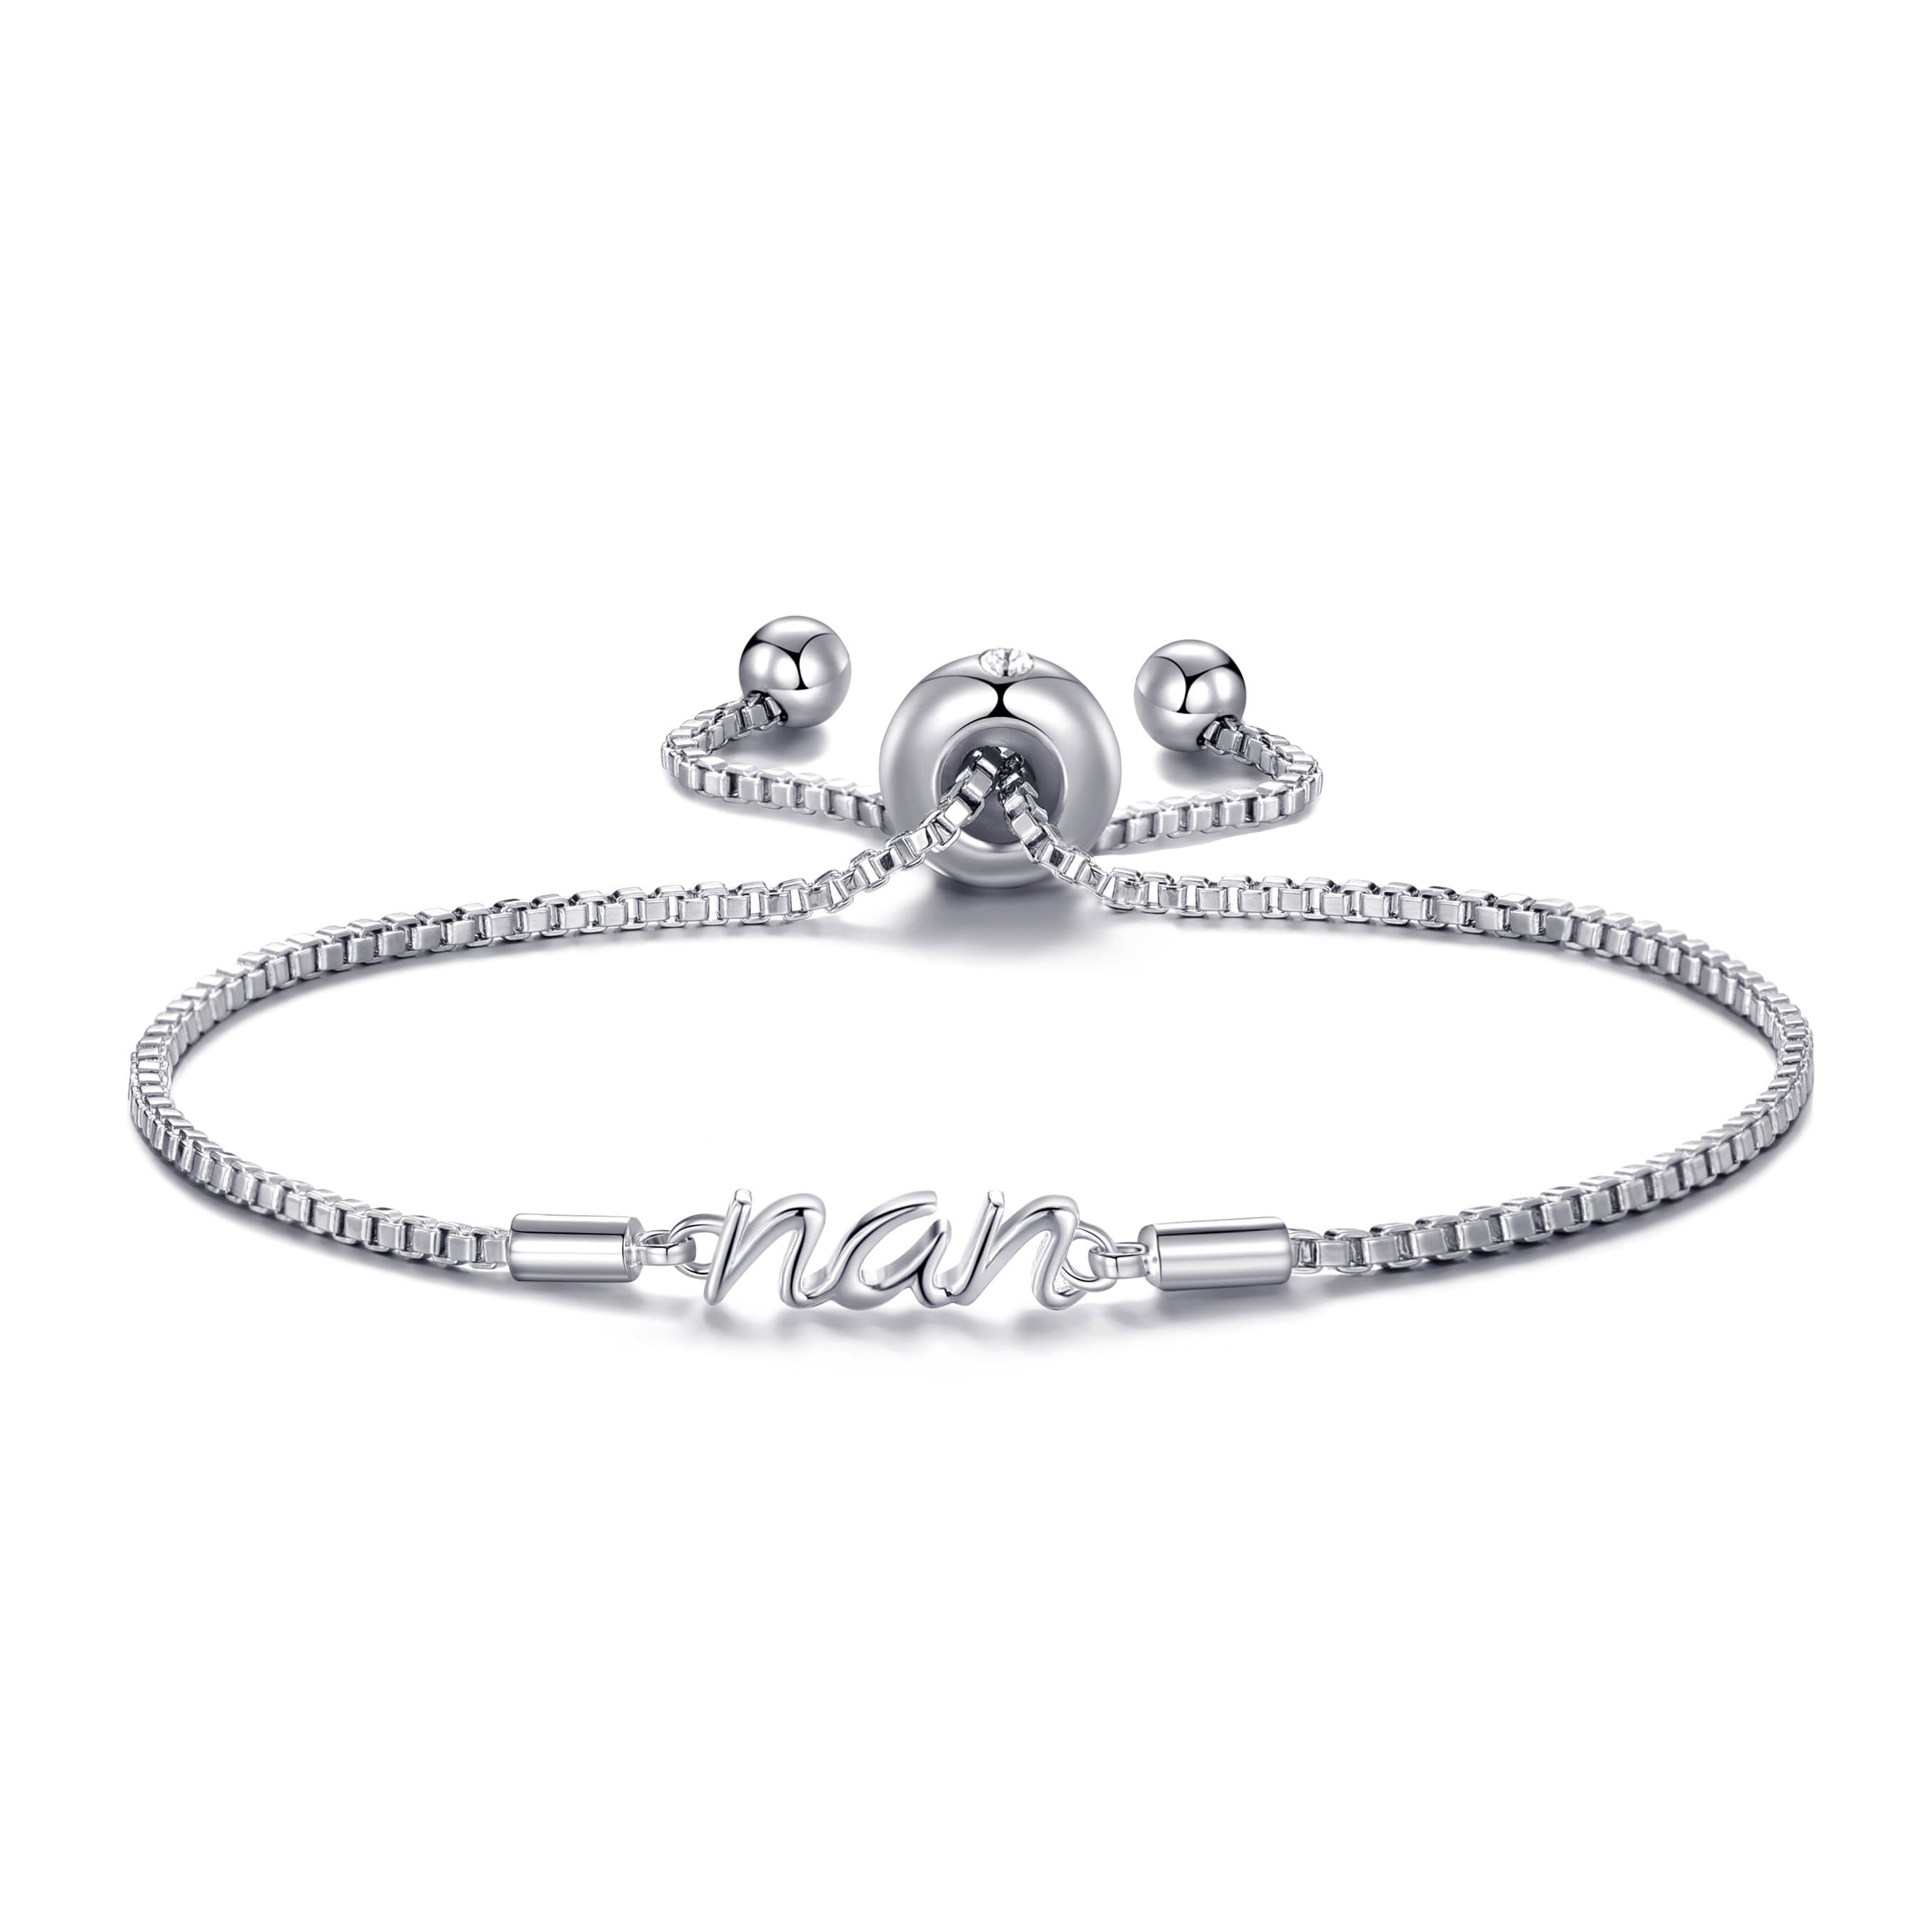 Silver Plated Nan Bracelet Created with Zircondia® Crystals by Philip Jones Jewellery